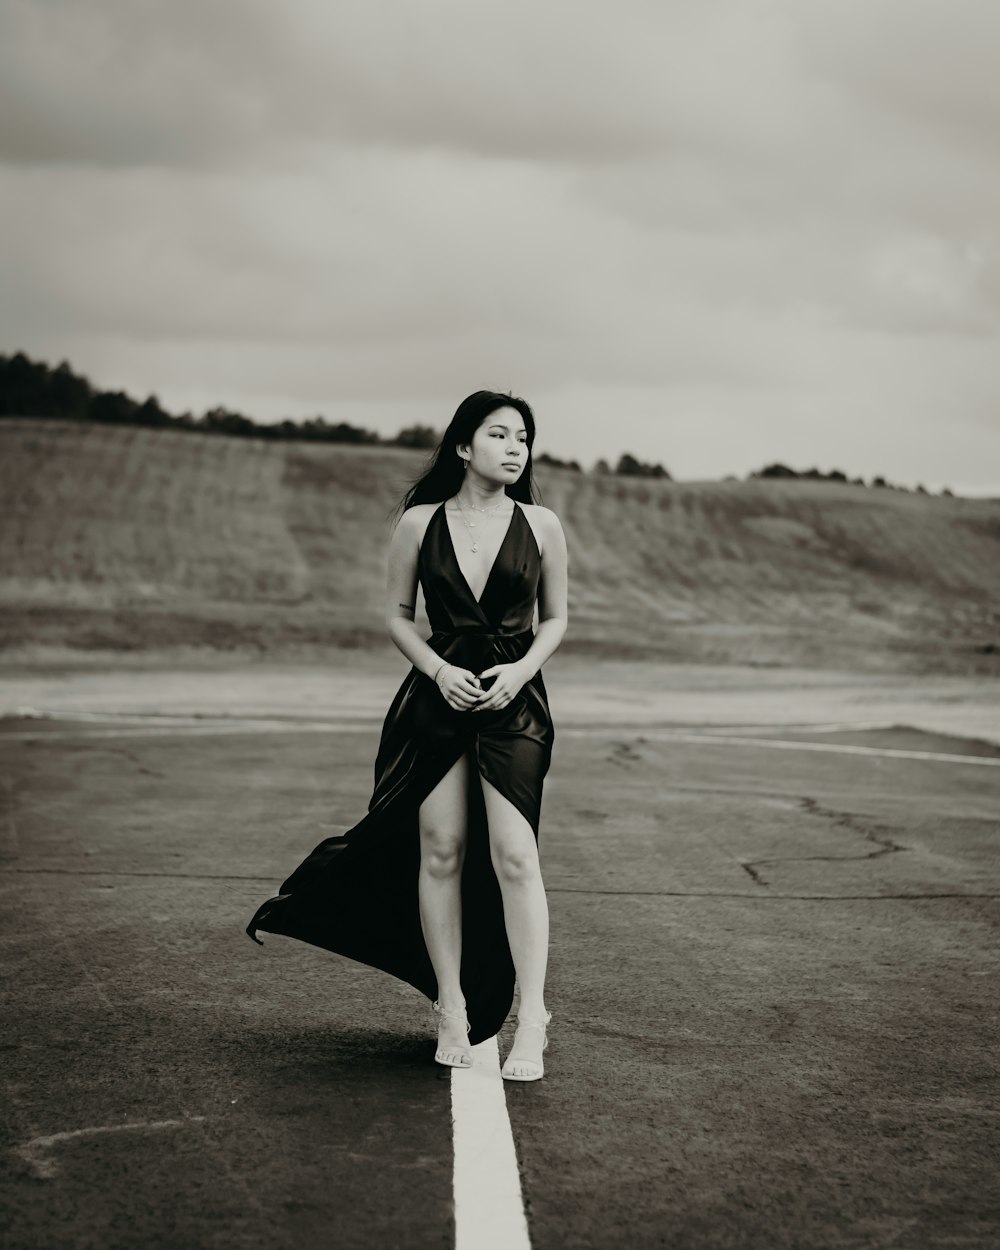 a woman in a black dress standing on a runway